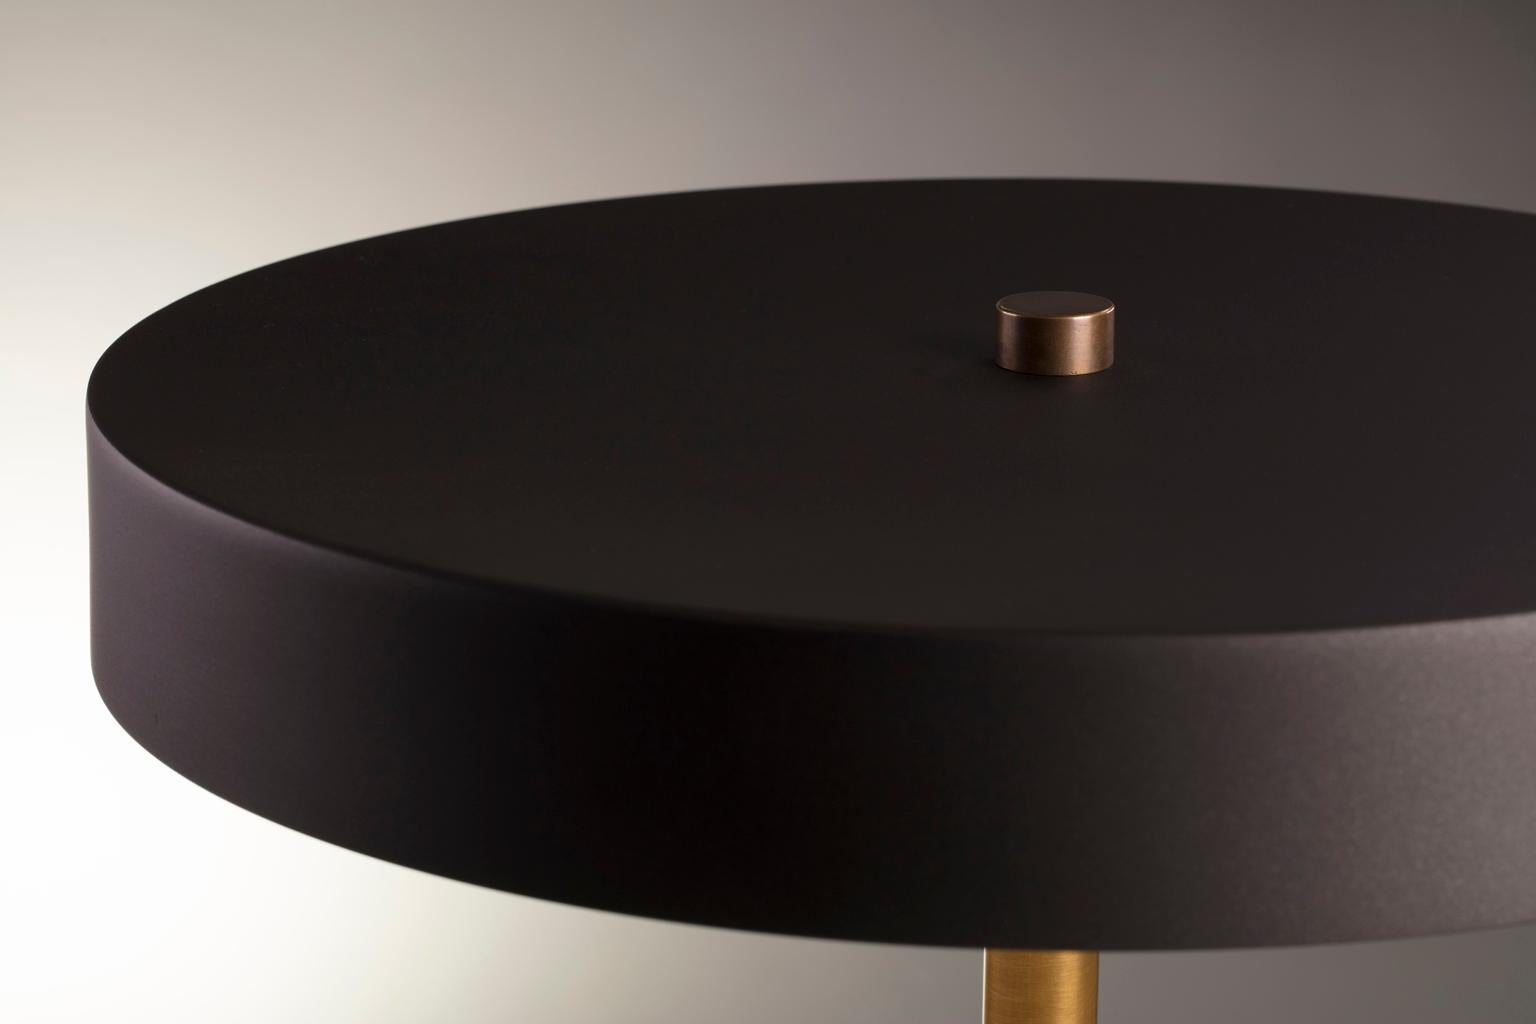 Post-Modern Modern Industrial Table Lamp with Matte Black Aluminum Shade and Brass Hardware